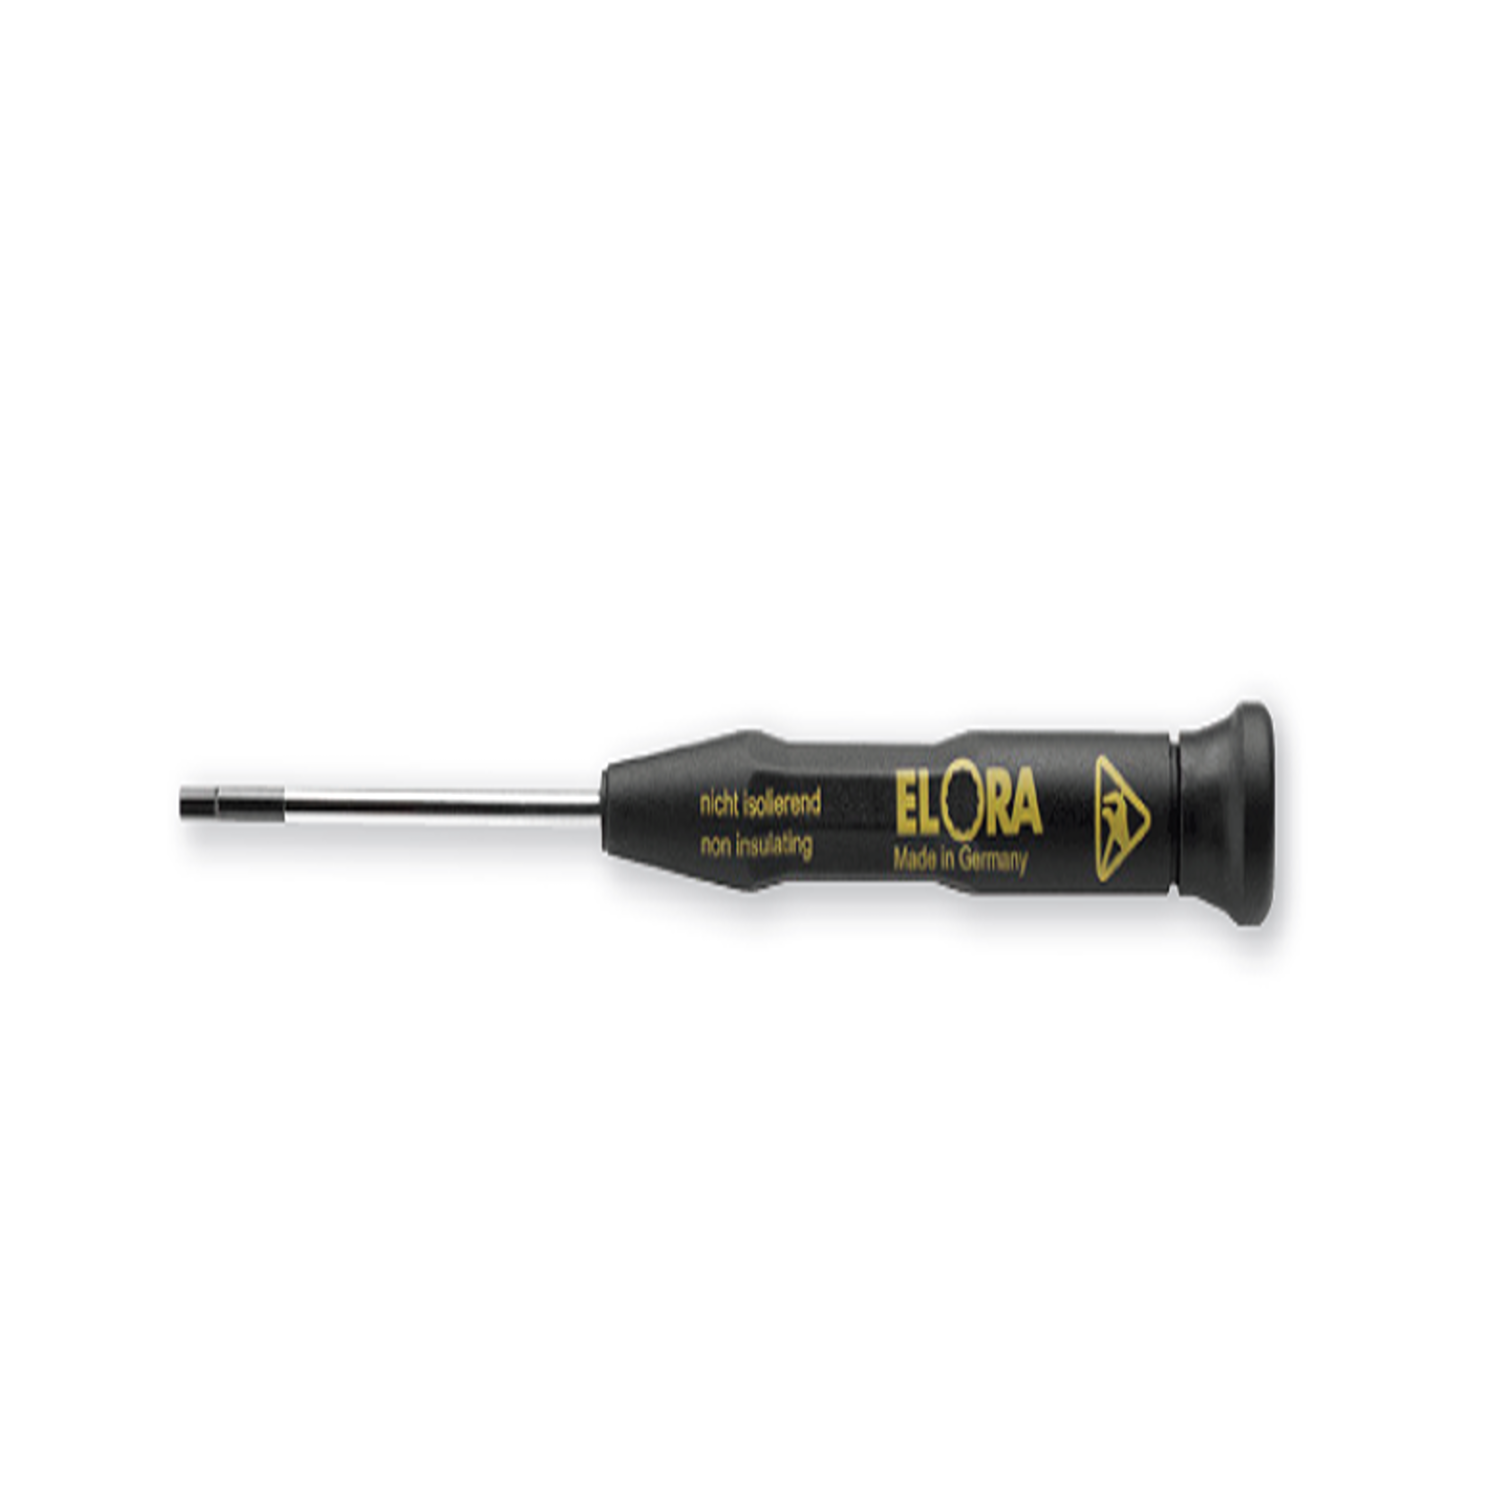 ELORA 625-ESD Electronic Screwdriver ESD (ELORA Tools) - Premium Screwdriver from ELORA - Shop now at Yew Aik.